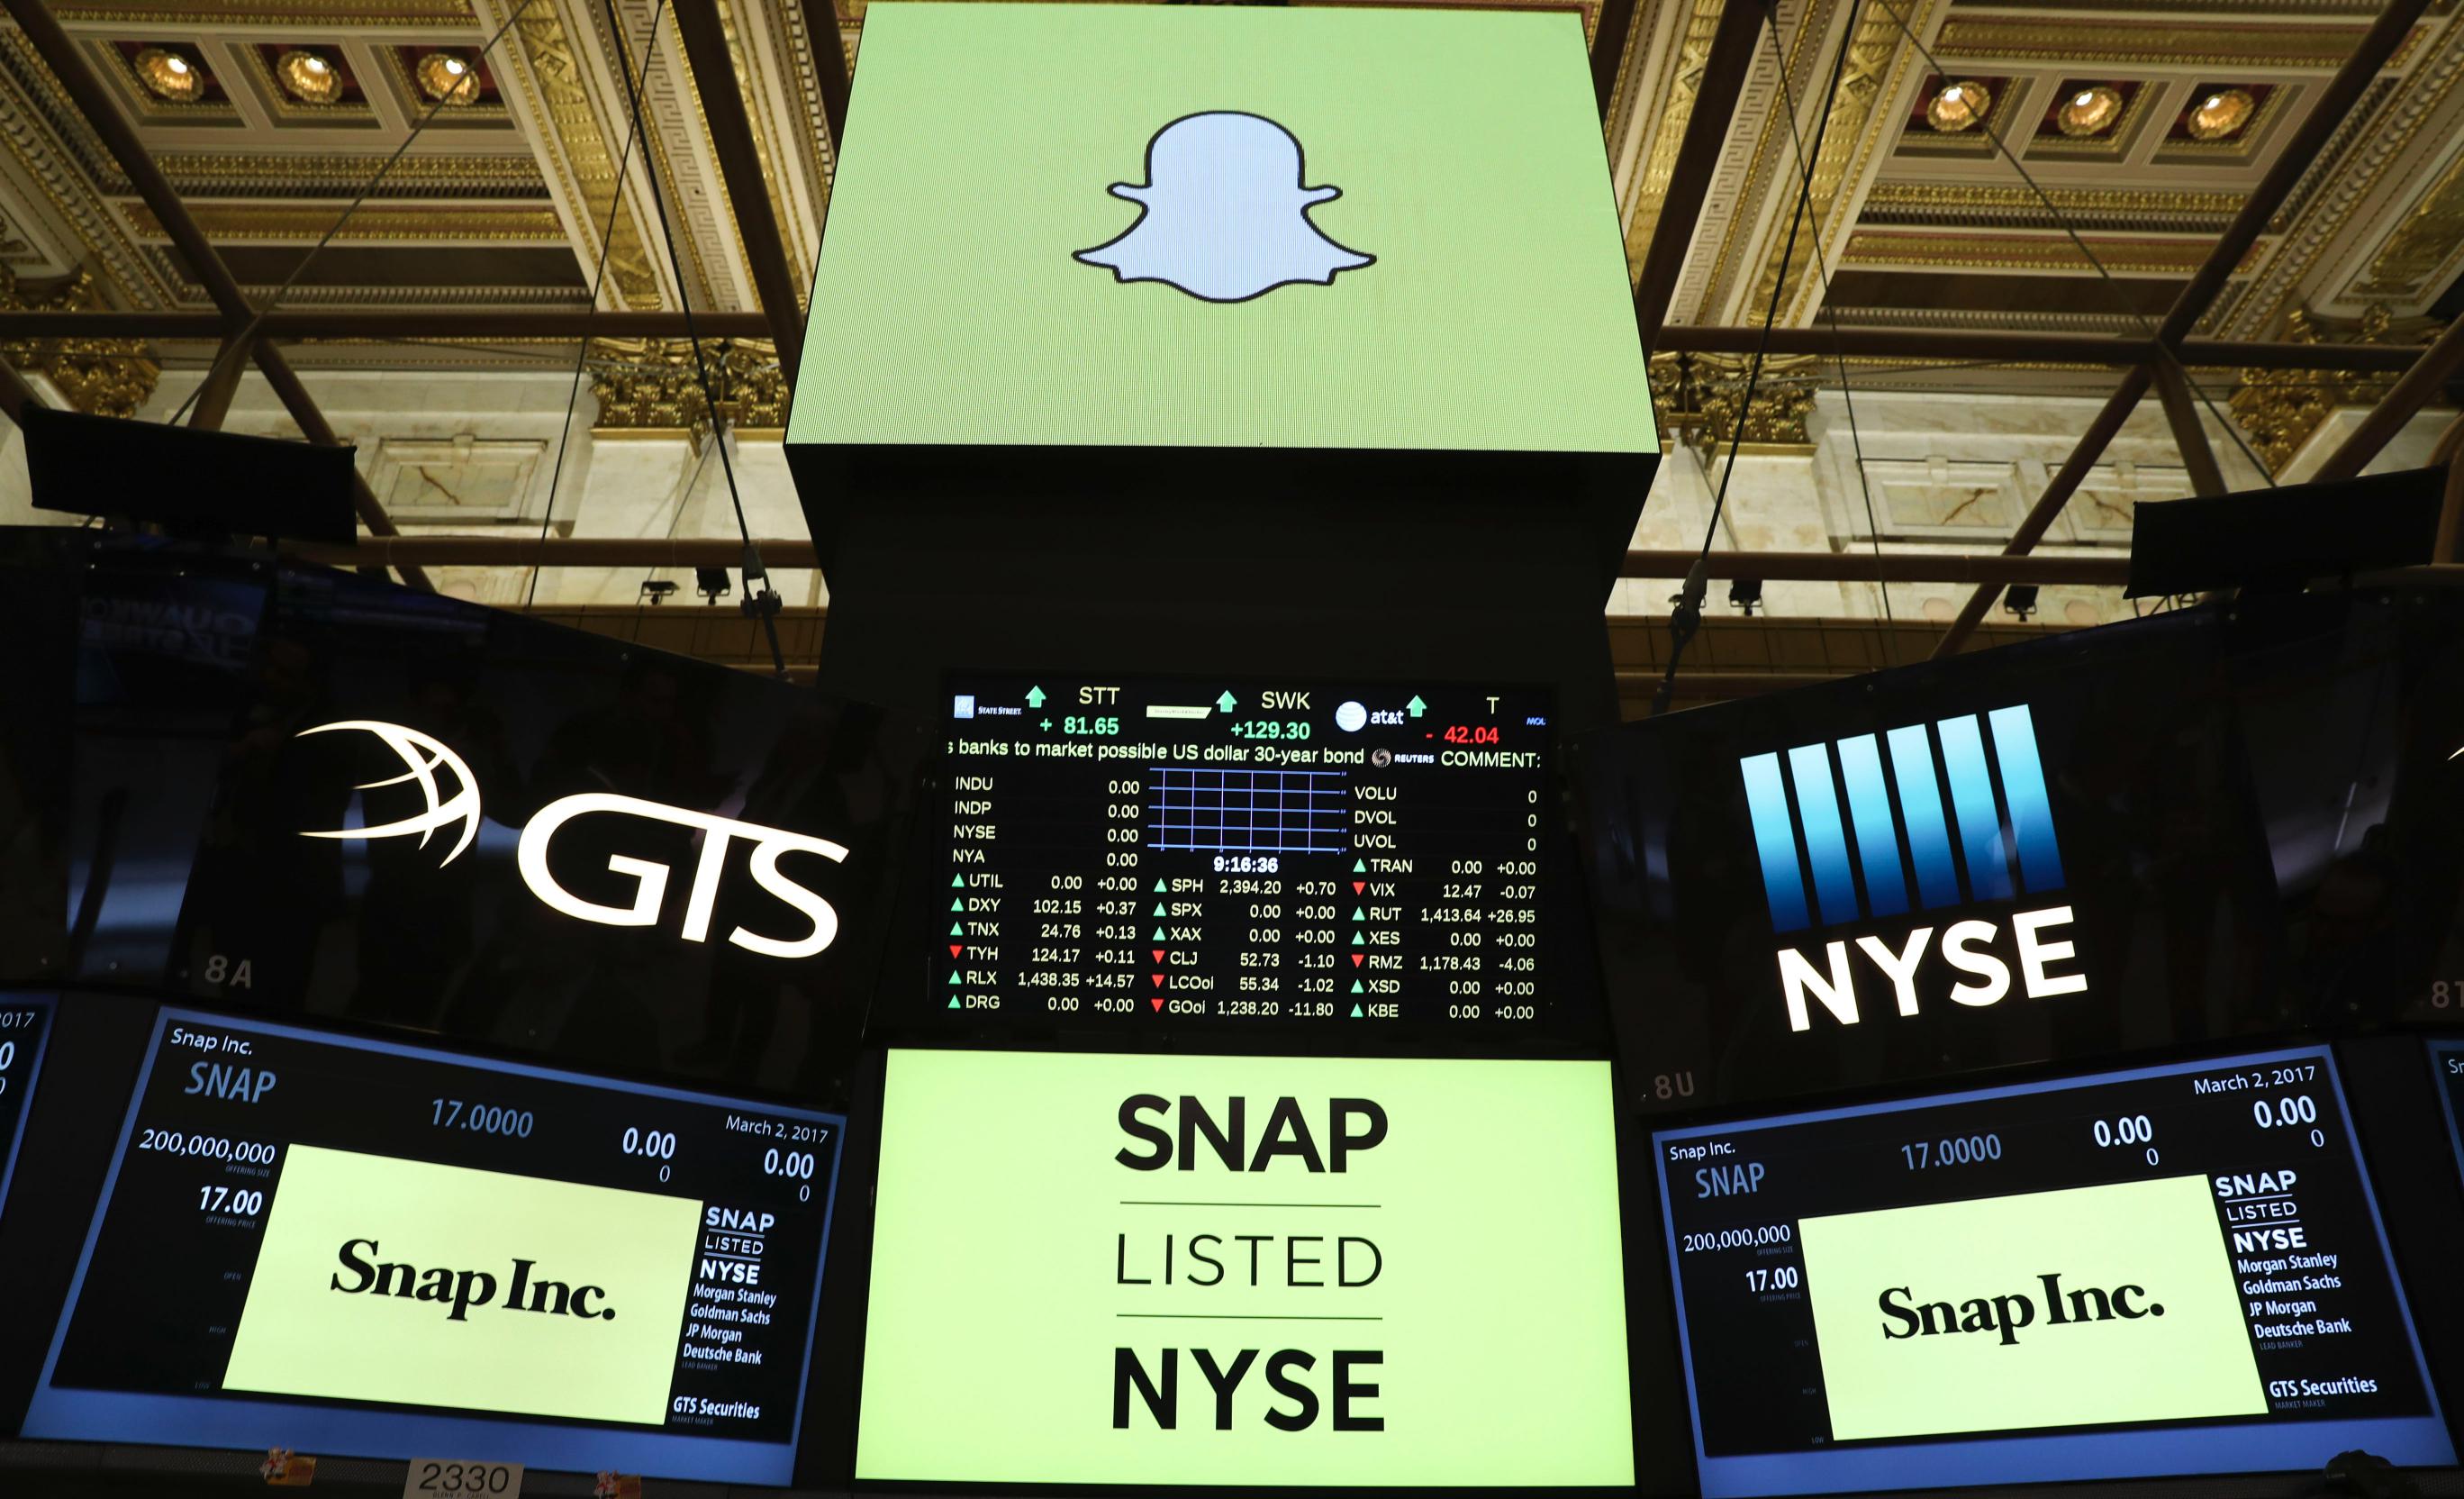 Snap ipo details sales investment bank